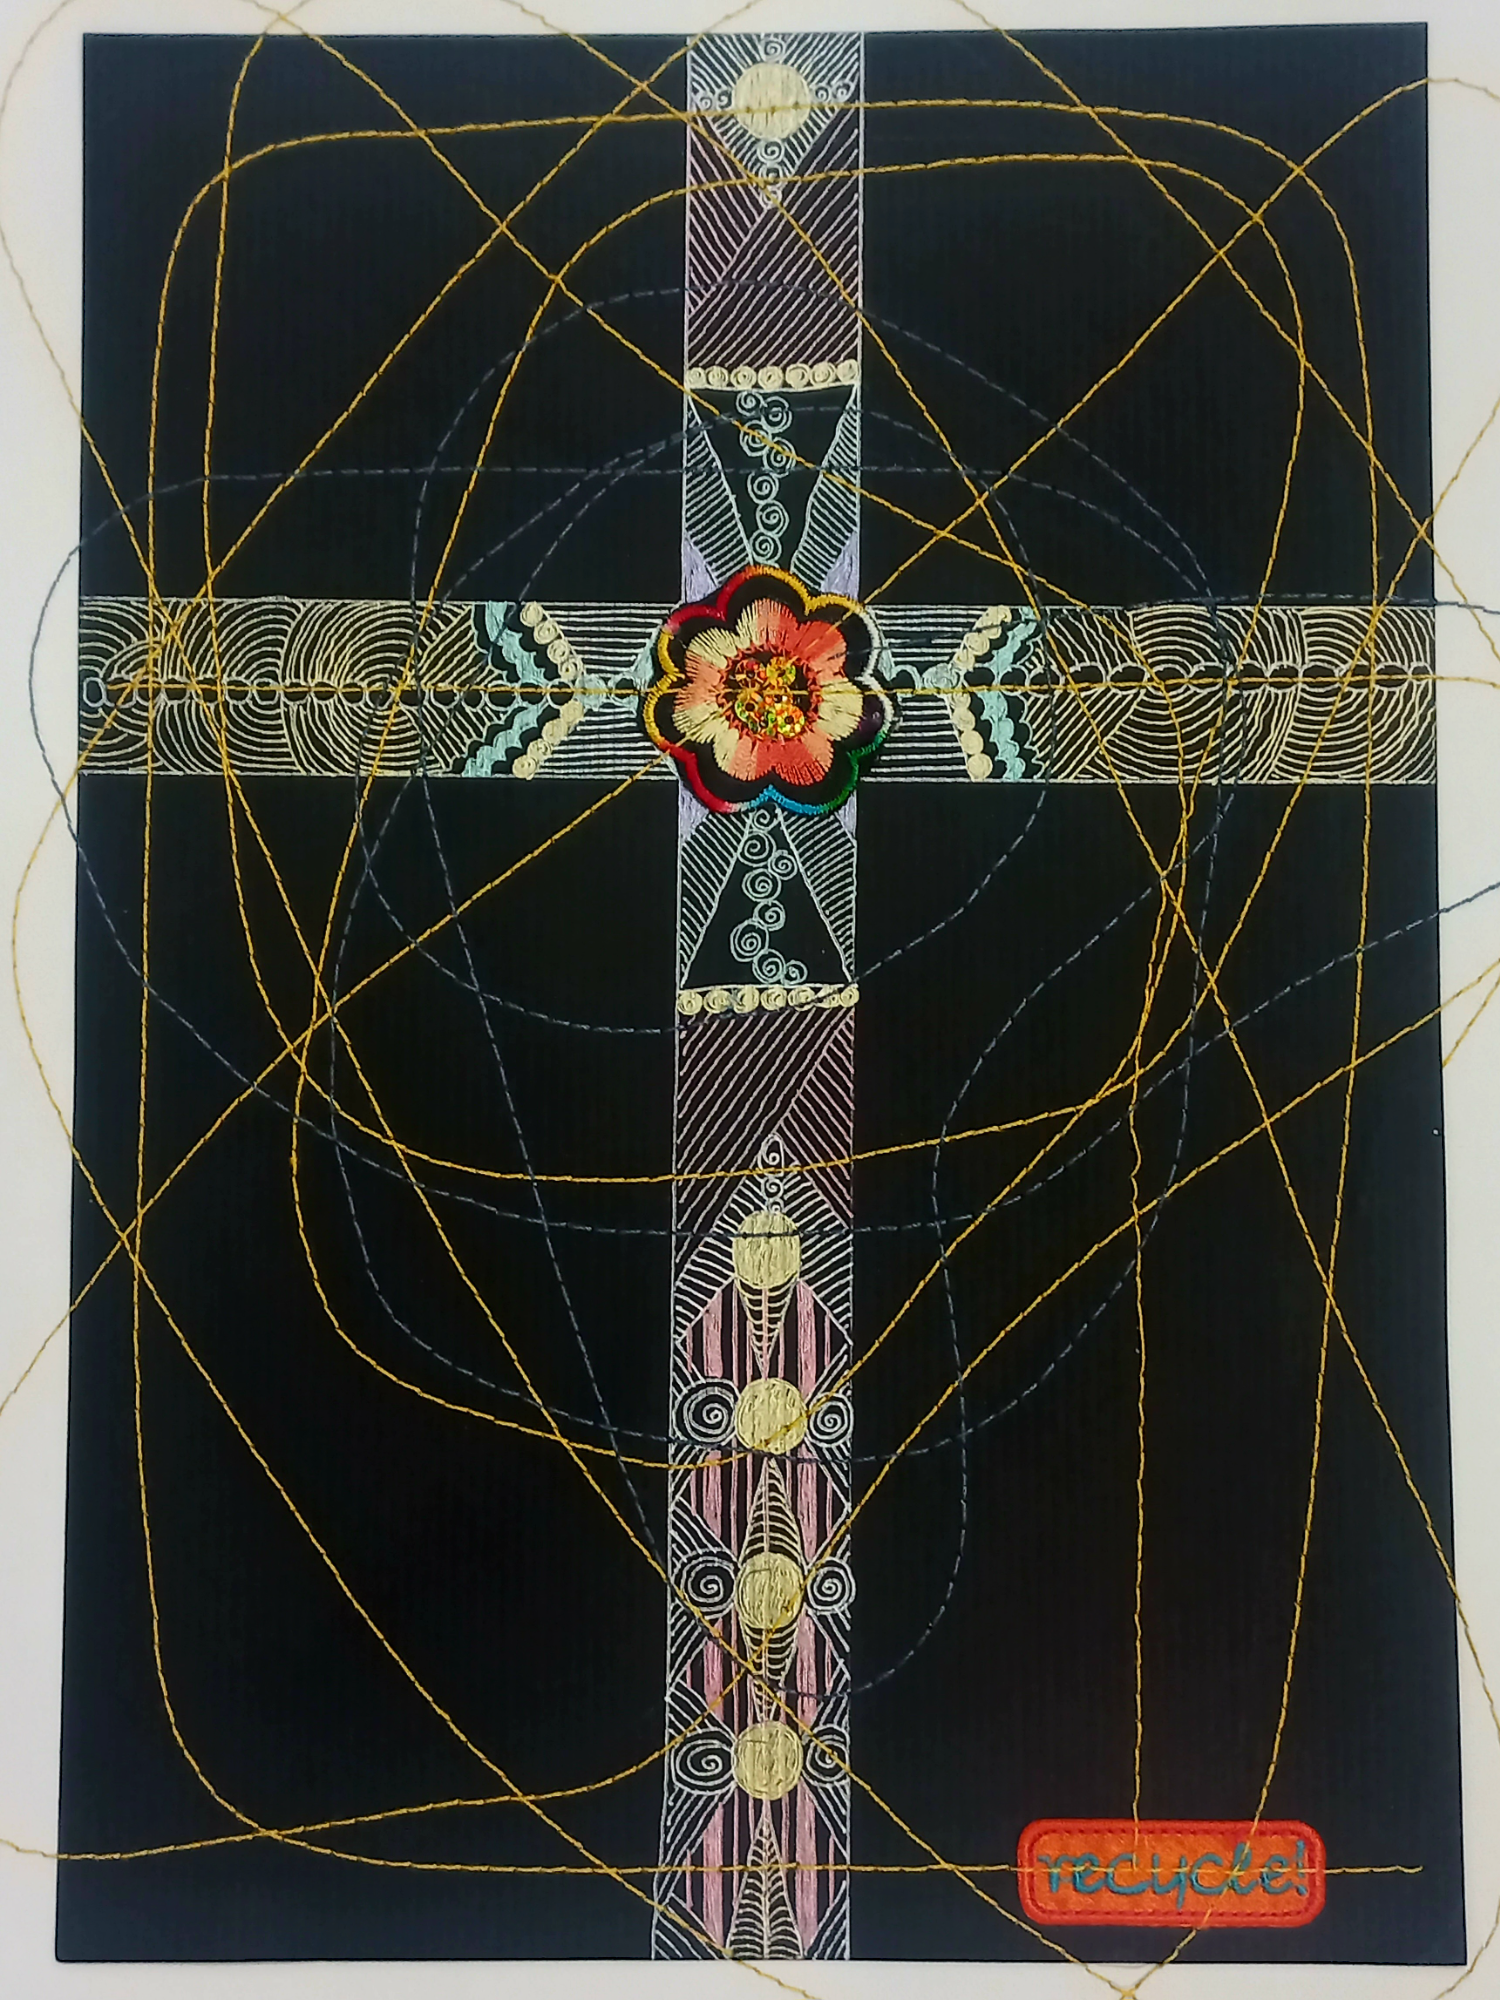 An artistic representation of a cross with intricate patterns and a flower at the center, set against a dark background with abstract golden lines. This original artwork is rendered as Recycle, a pen and ink drawing inspired by Louise Keen.